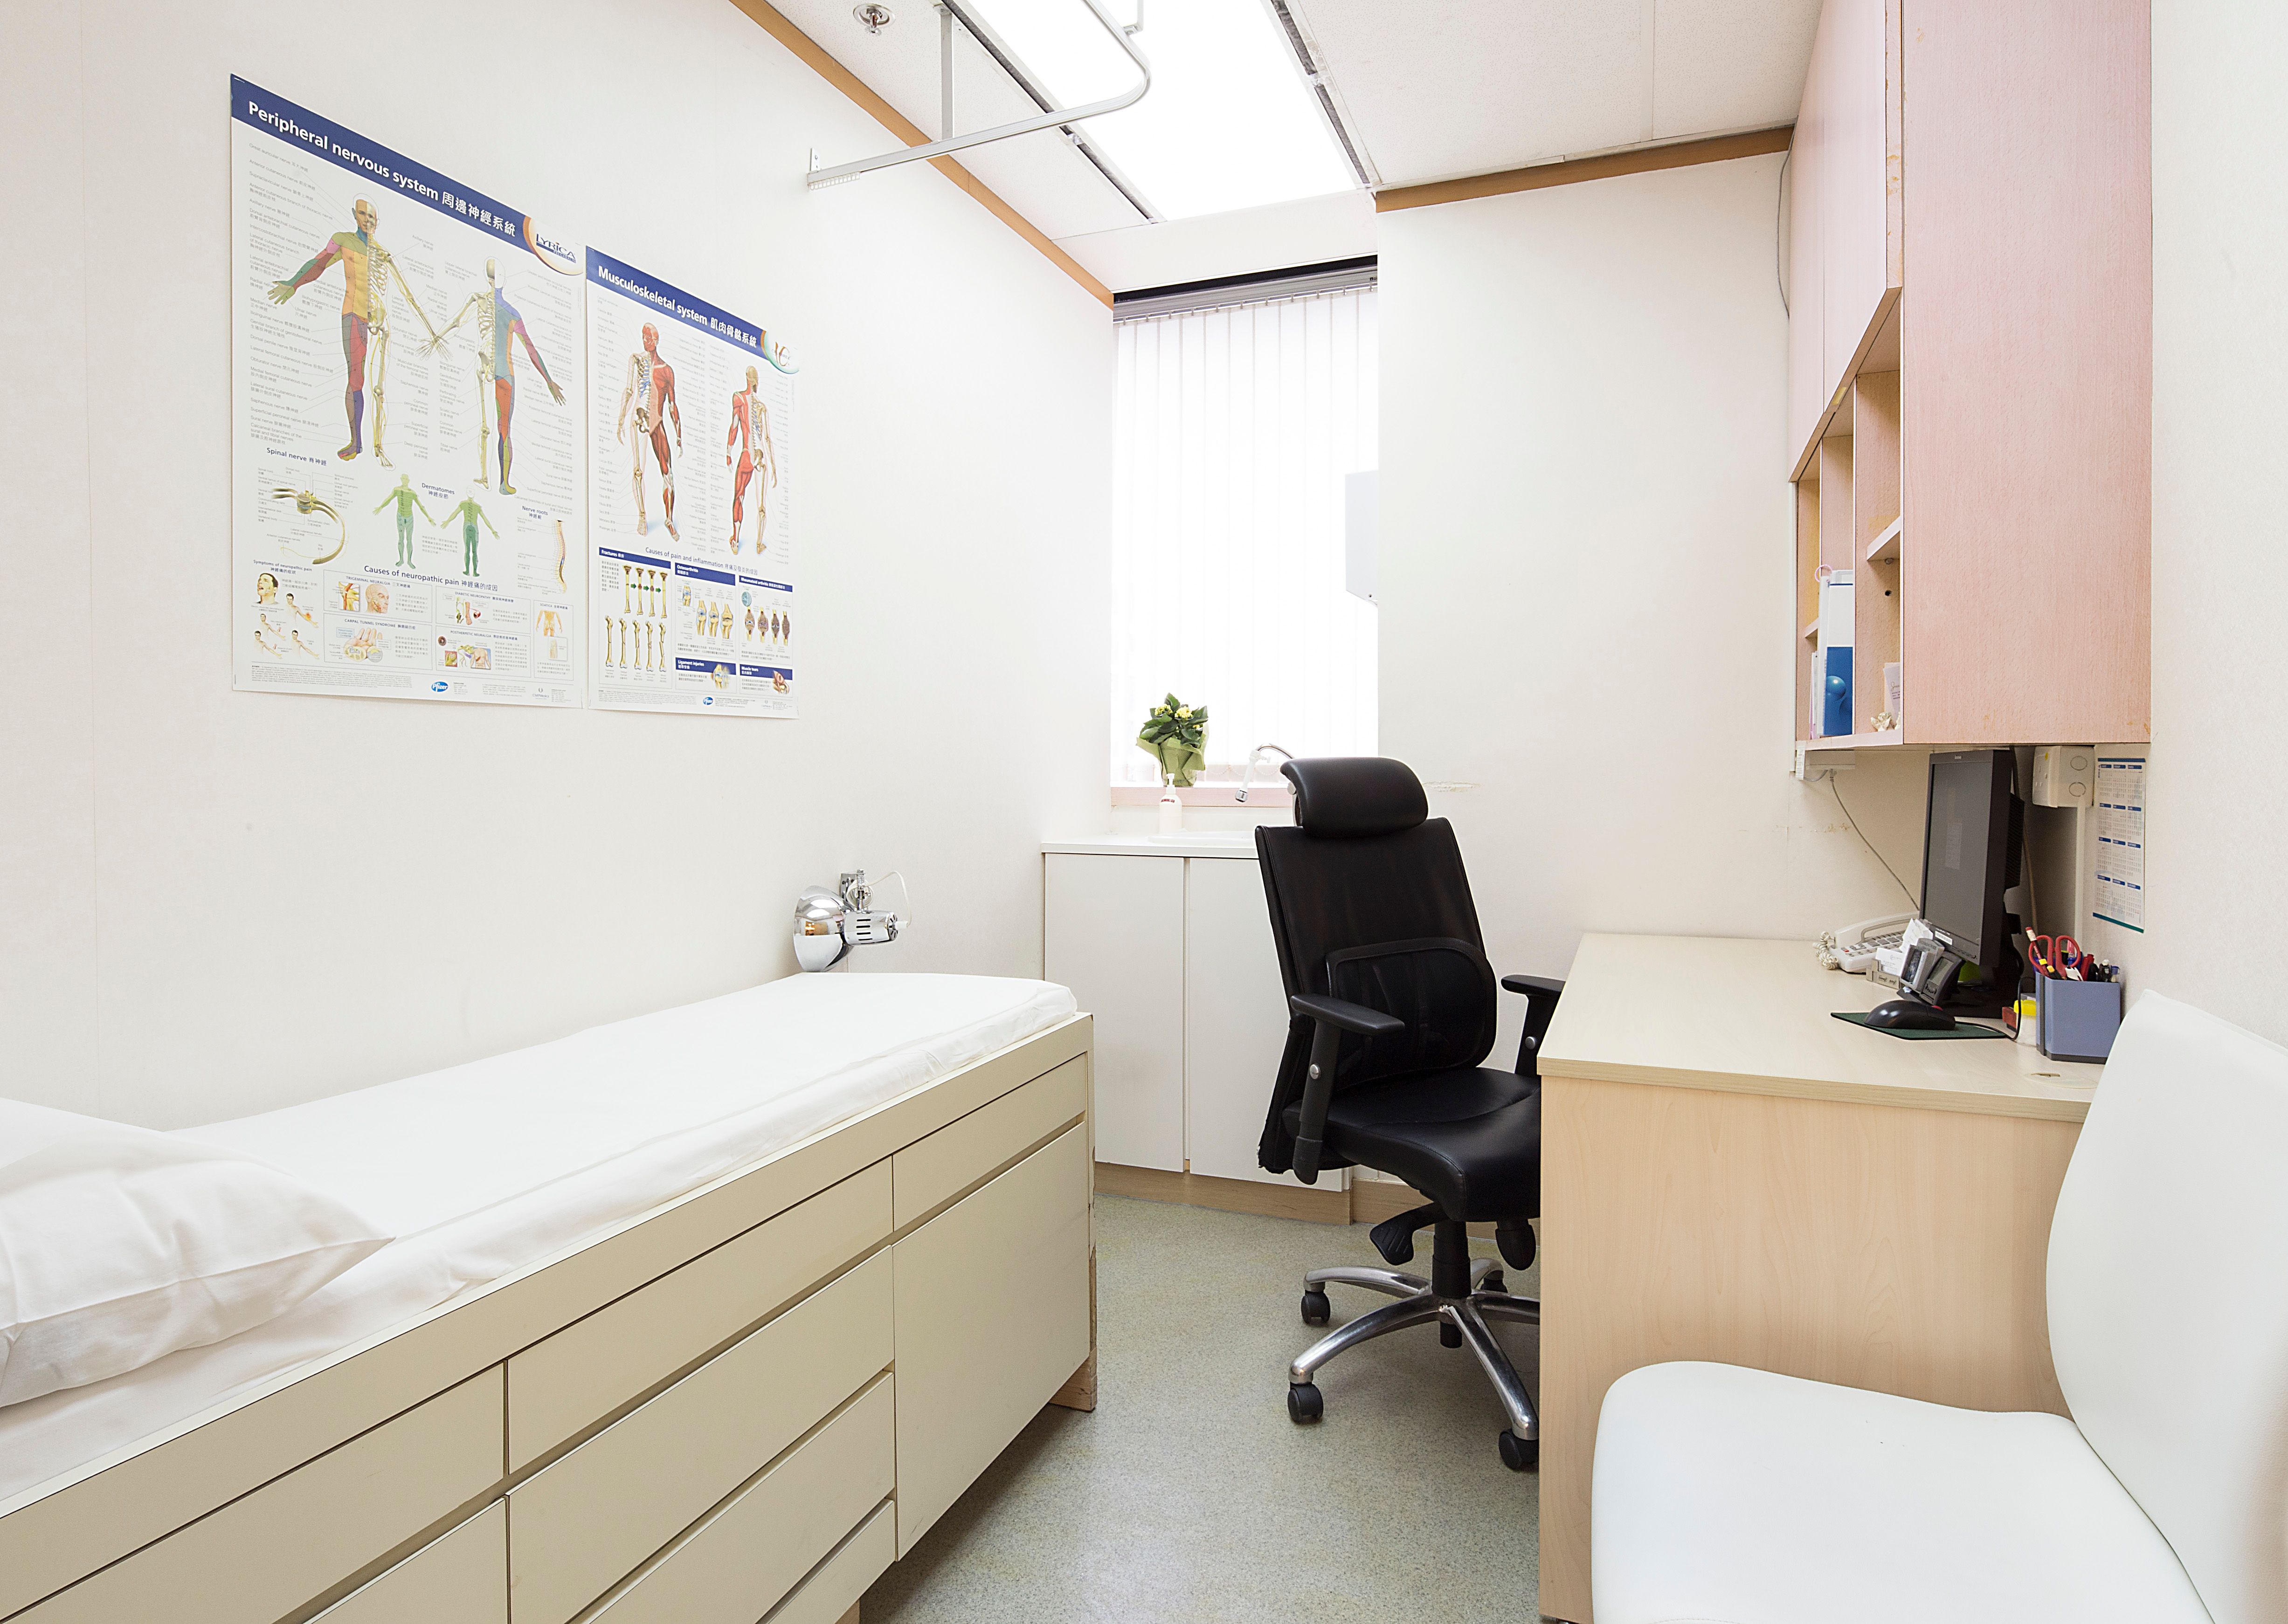 Examination room with patient bed, desk, anatomy posters